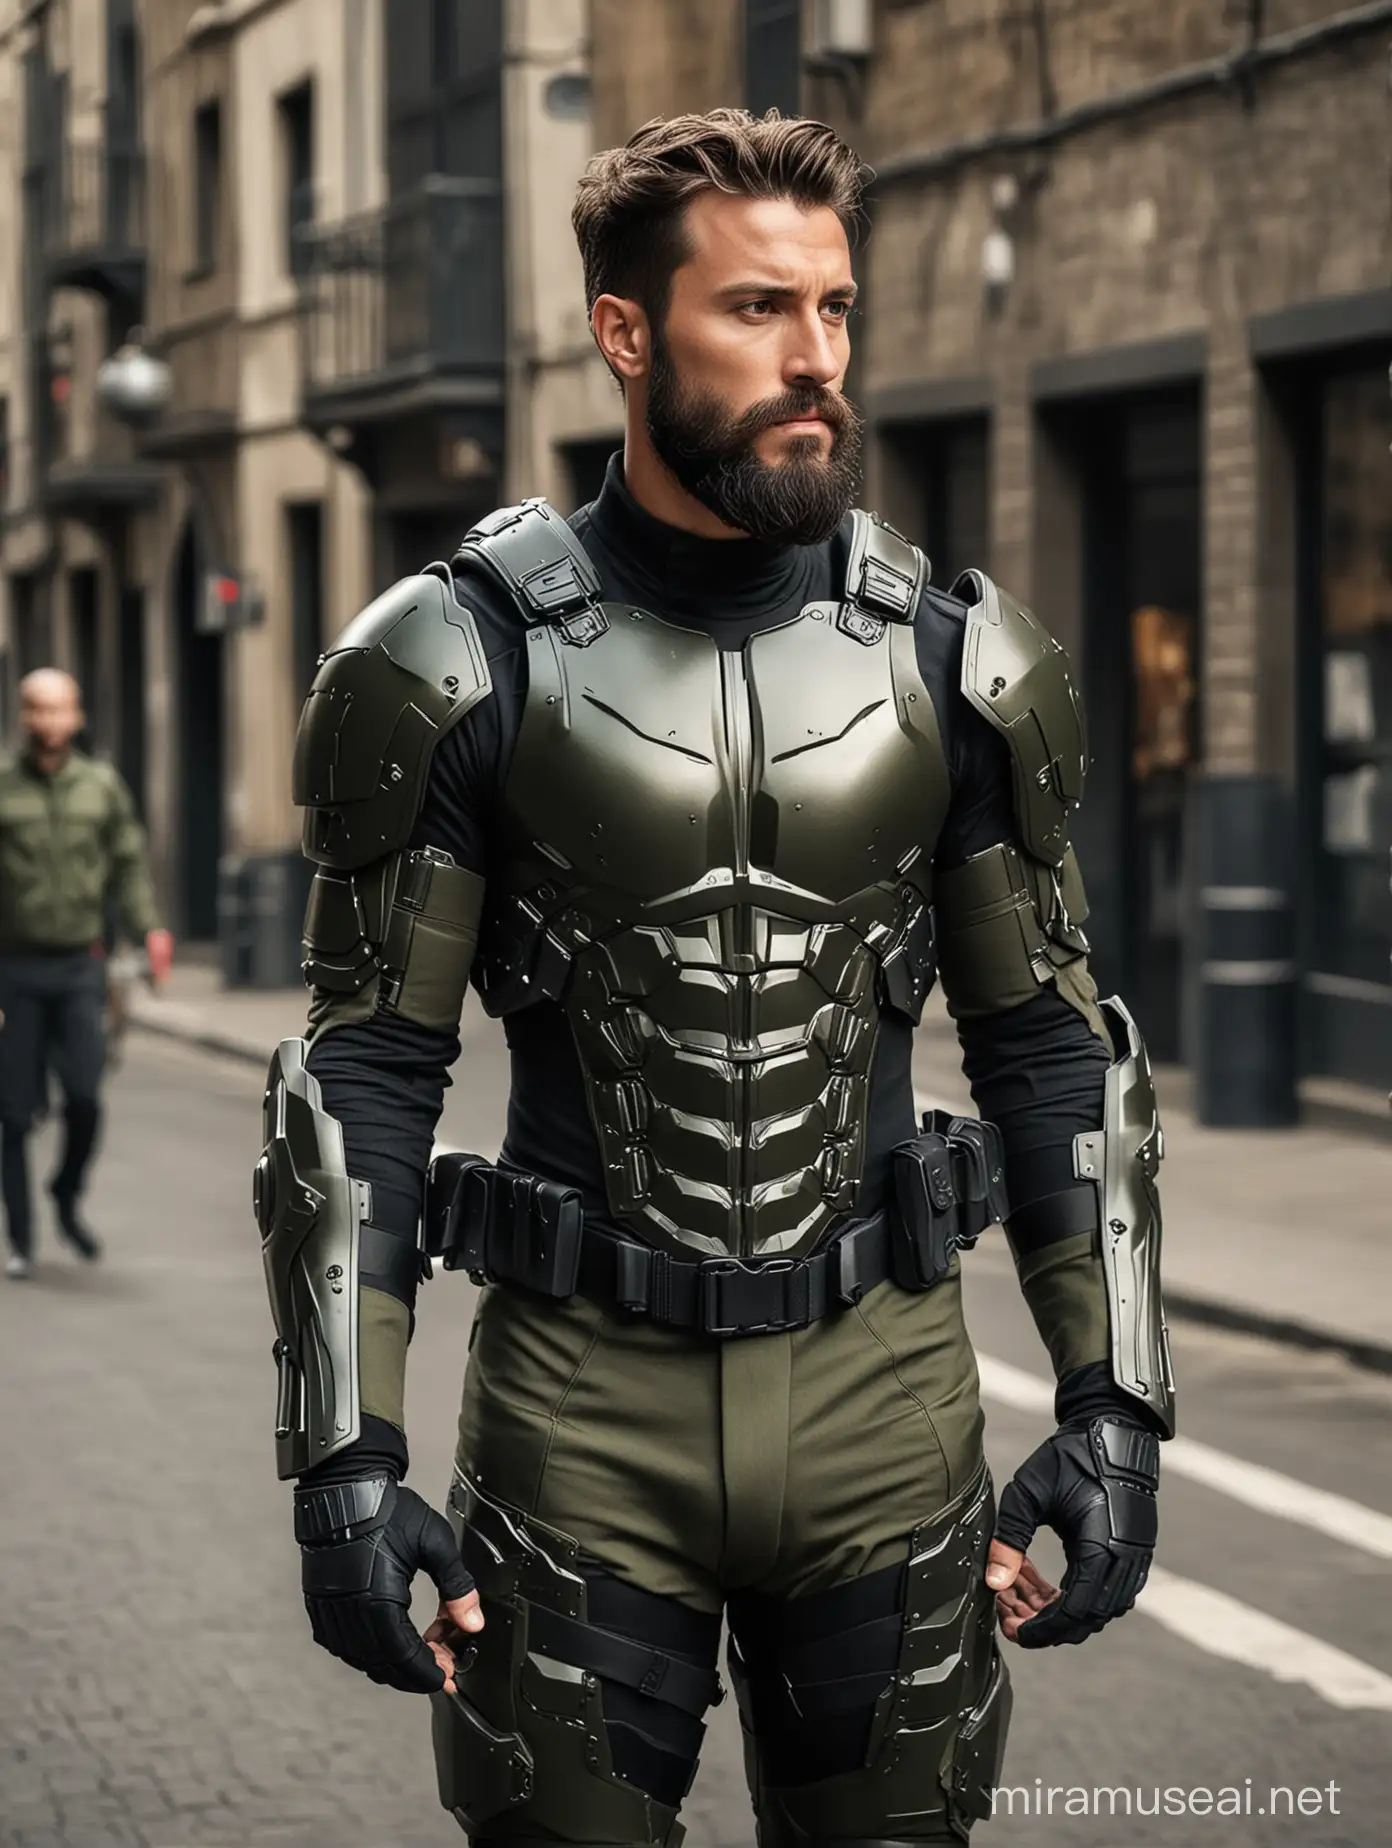 Tall and handsome muscular men with beautiful hairstyle and beard with attractive eyes and Big wide shoulder and chest in High Tech dark olive green and black armour suit with helmet and high Tech firearms walking on street 